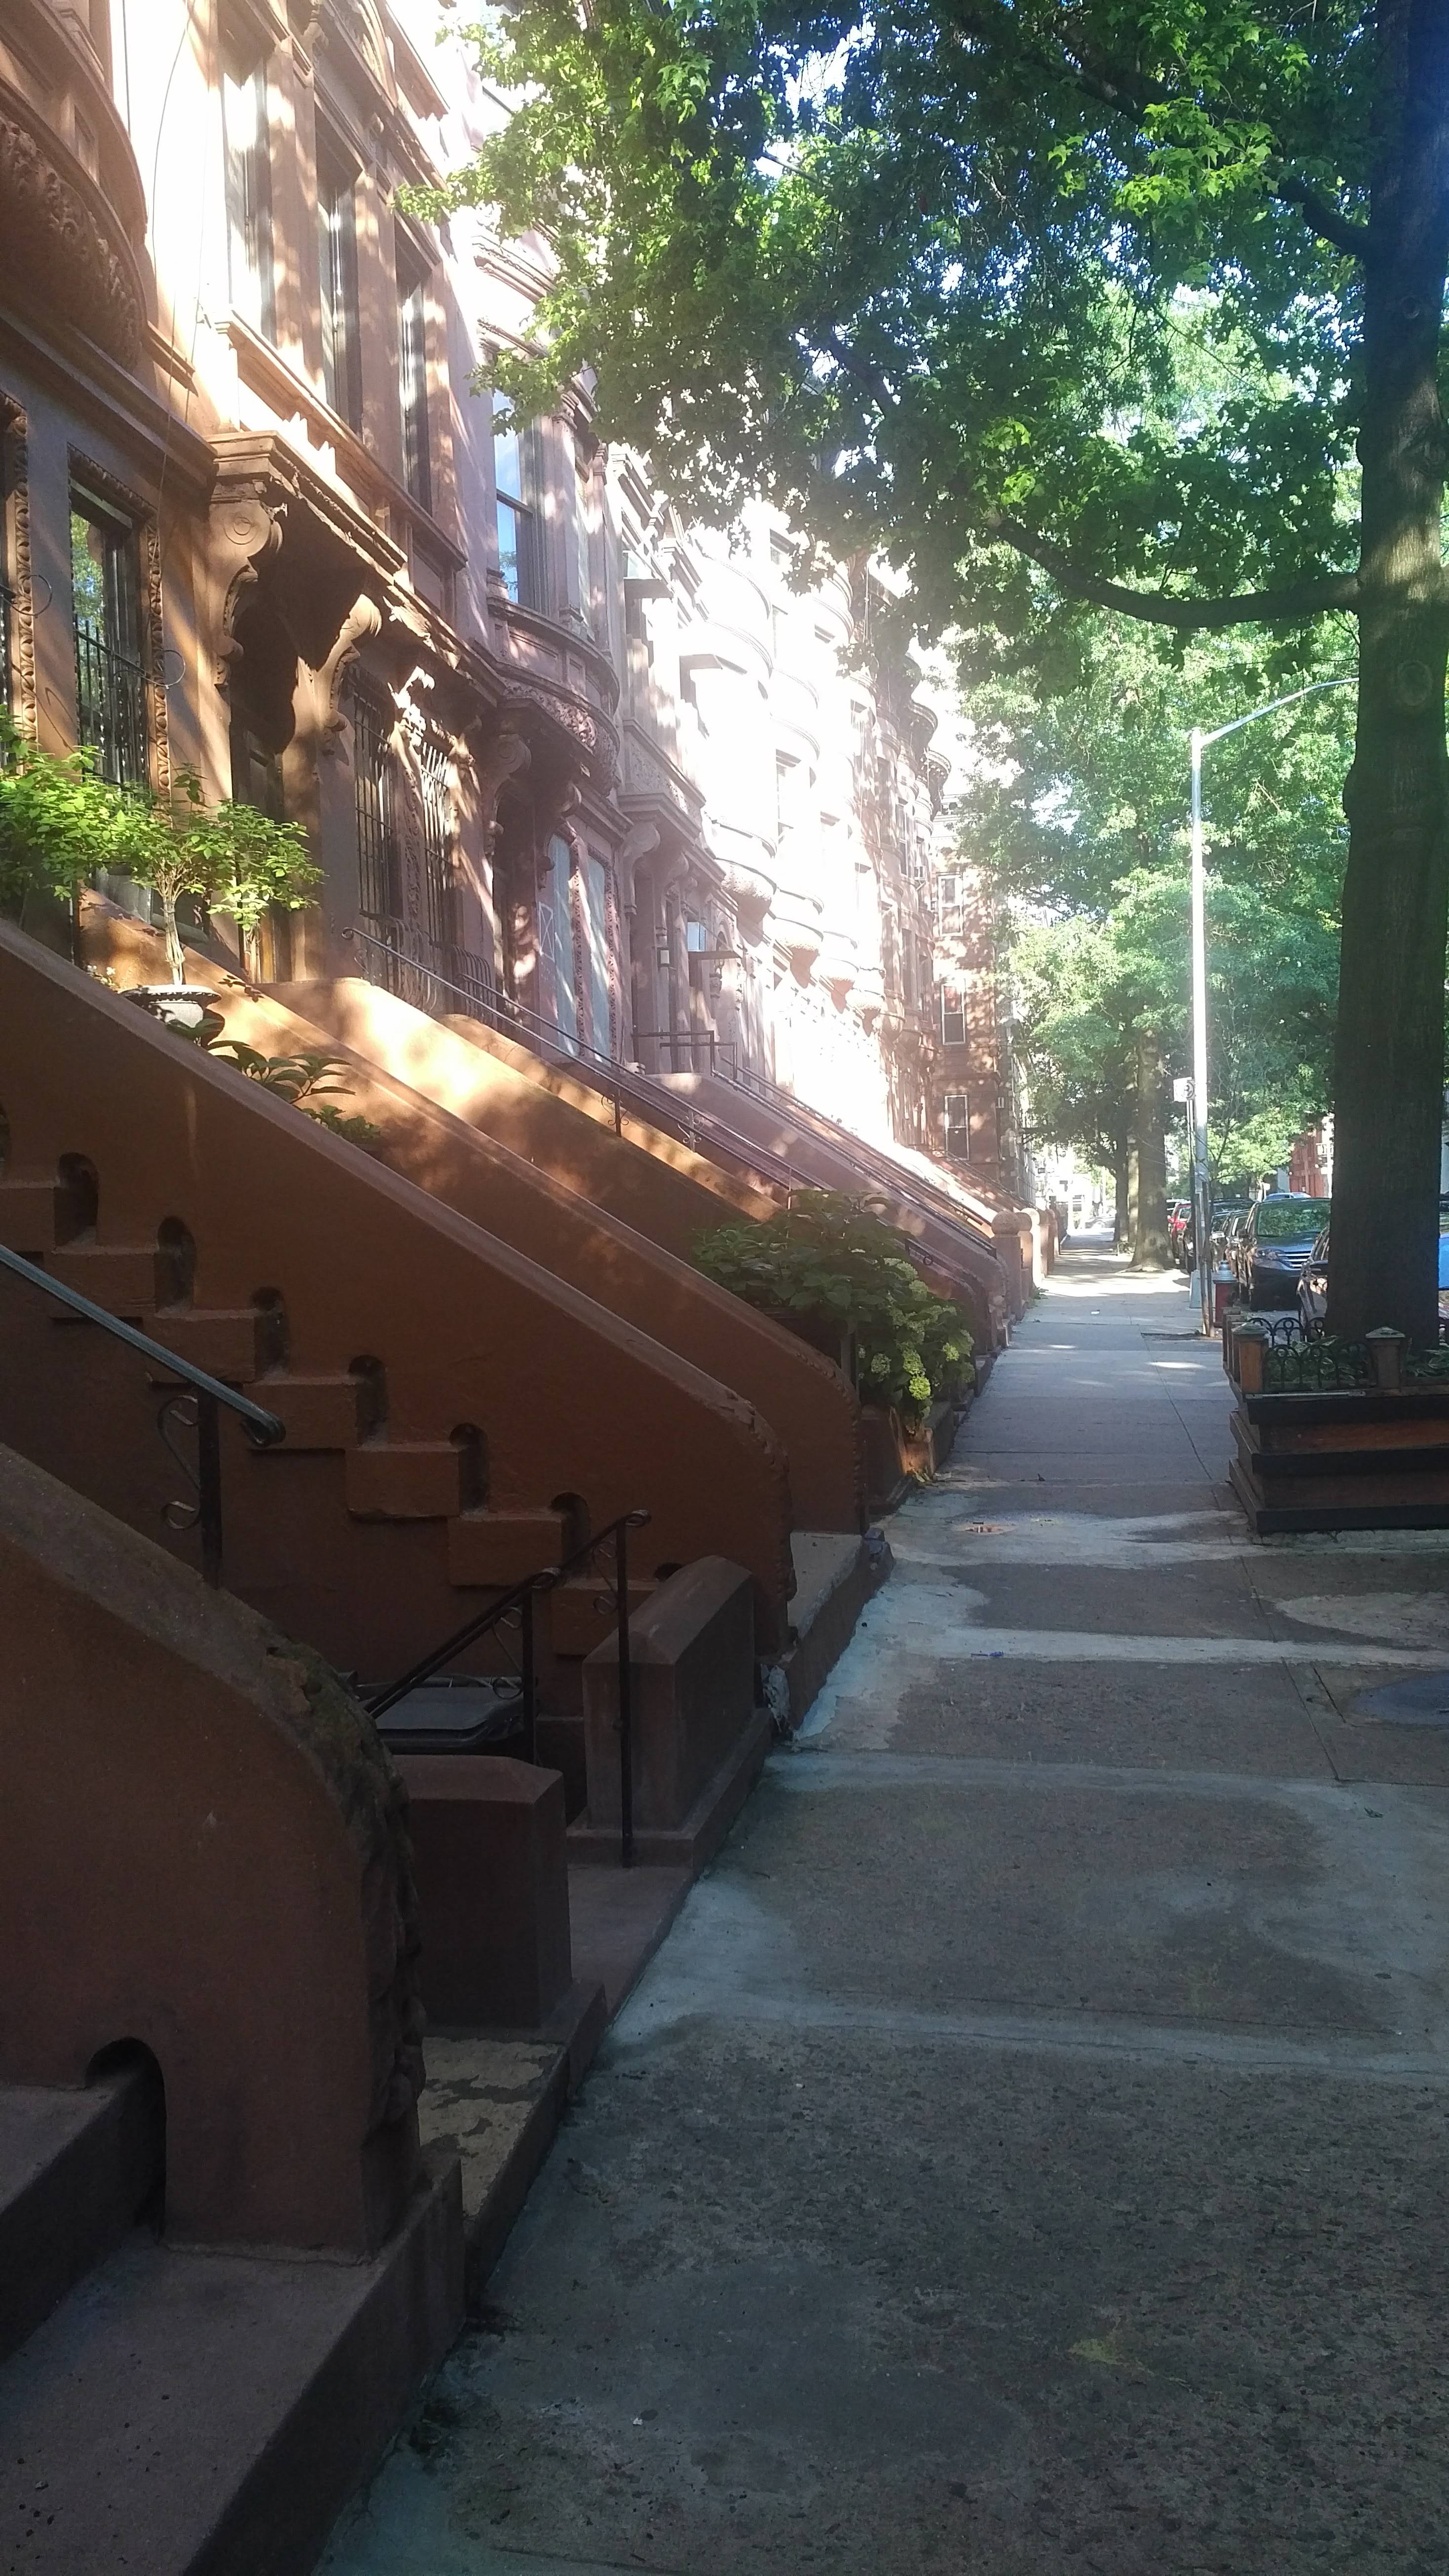 Fully furnished Brownstone Studio on a tree lined street located at Striver's Row Harlem